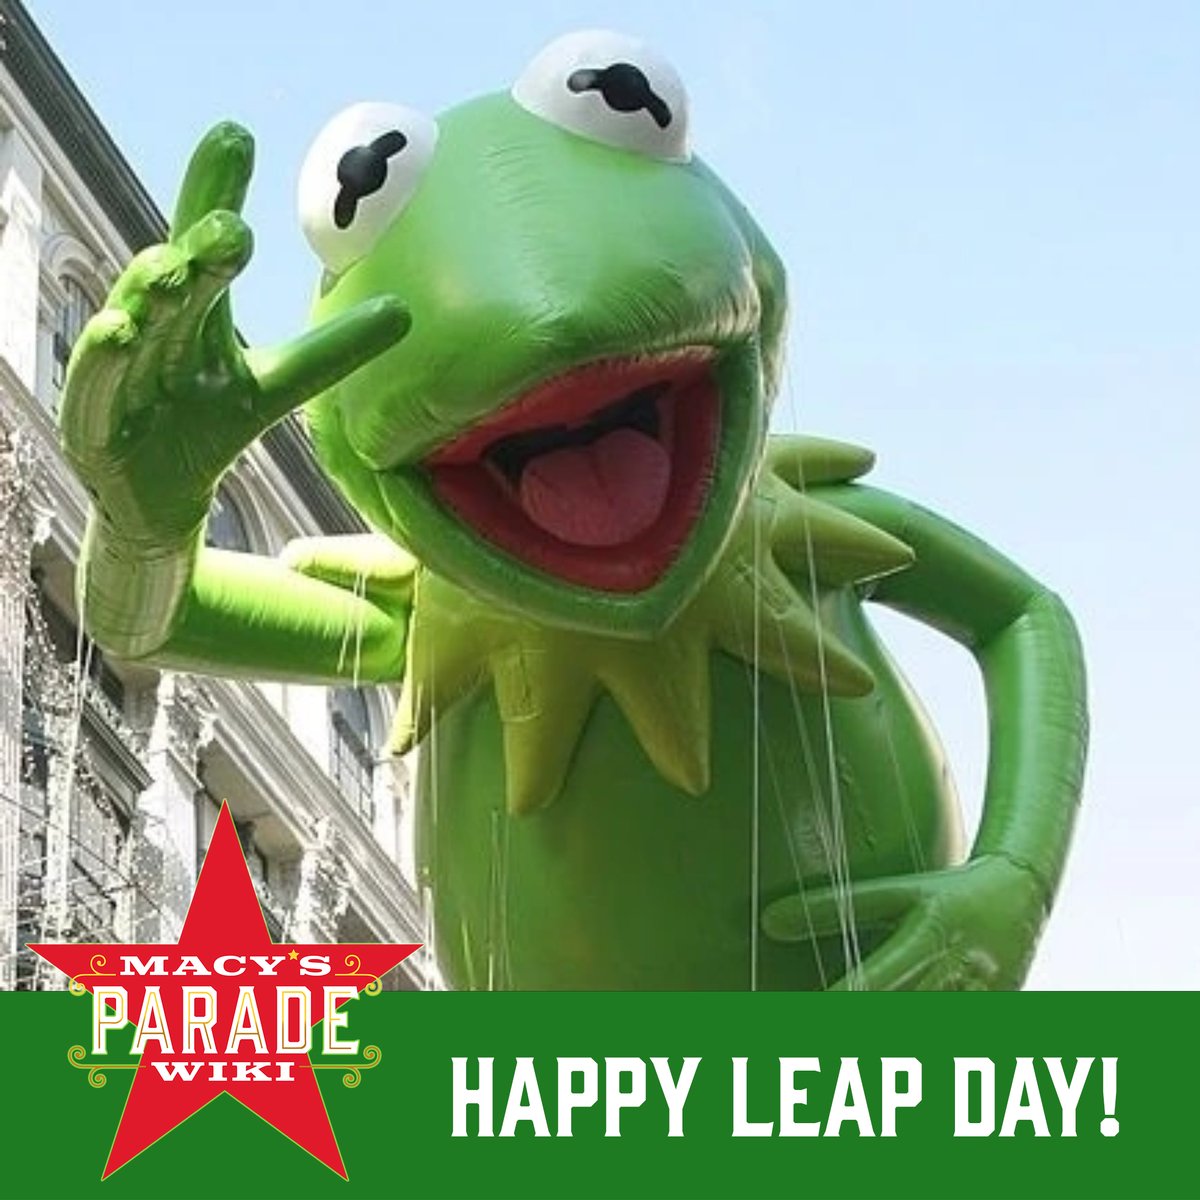 🐸 Happy Leap Day from the Macy's Thanksgiving Day Parade Wiki! 🐸

#macysparade #macysthanksgivingdayparade #macysballoons #kermitthefrog #leapday #themuppets #nyc #paradeready #letshaveaparade